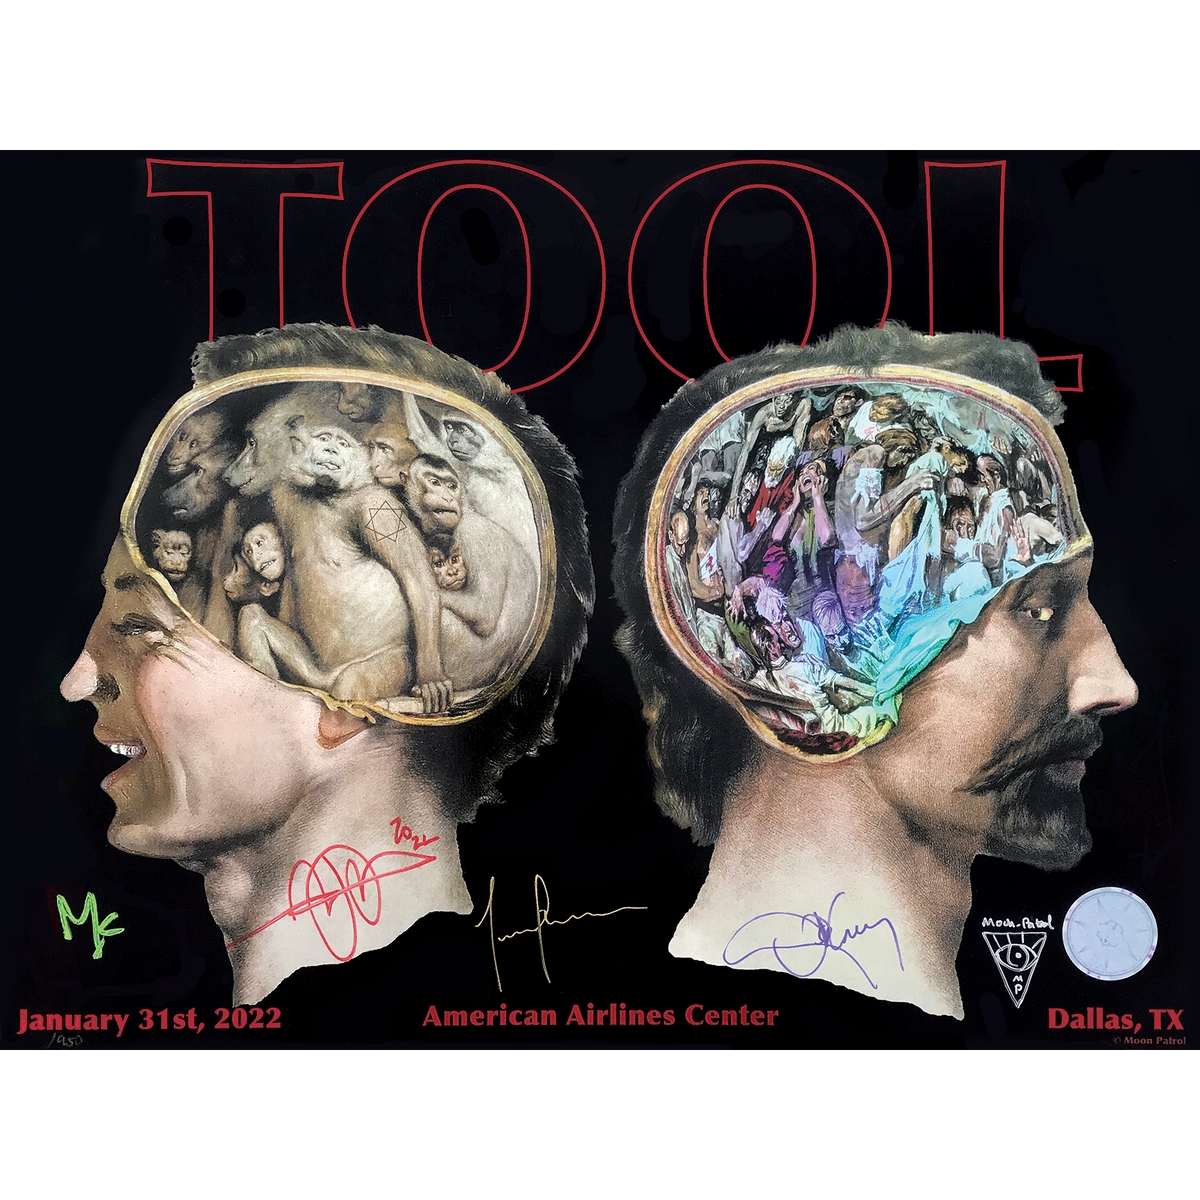 Moon Patrol x TOOL - Exclusive Remarqued Artist Edition of 40 - 18 x 24&quot;